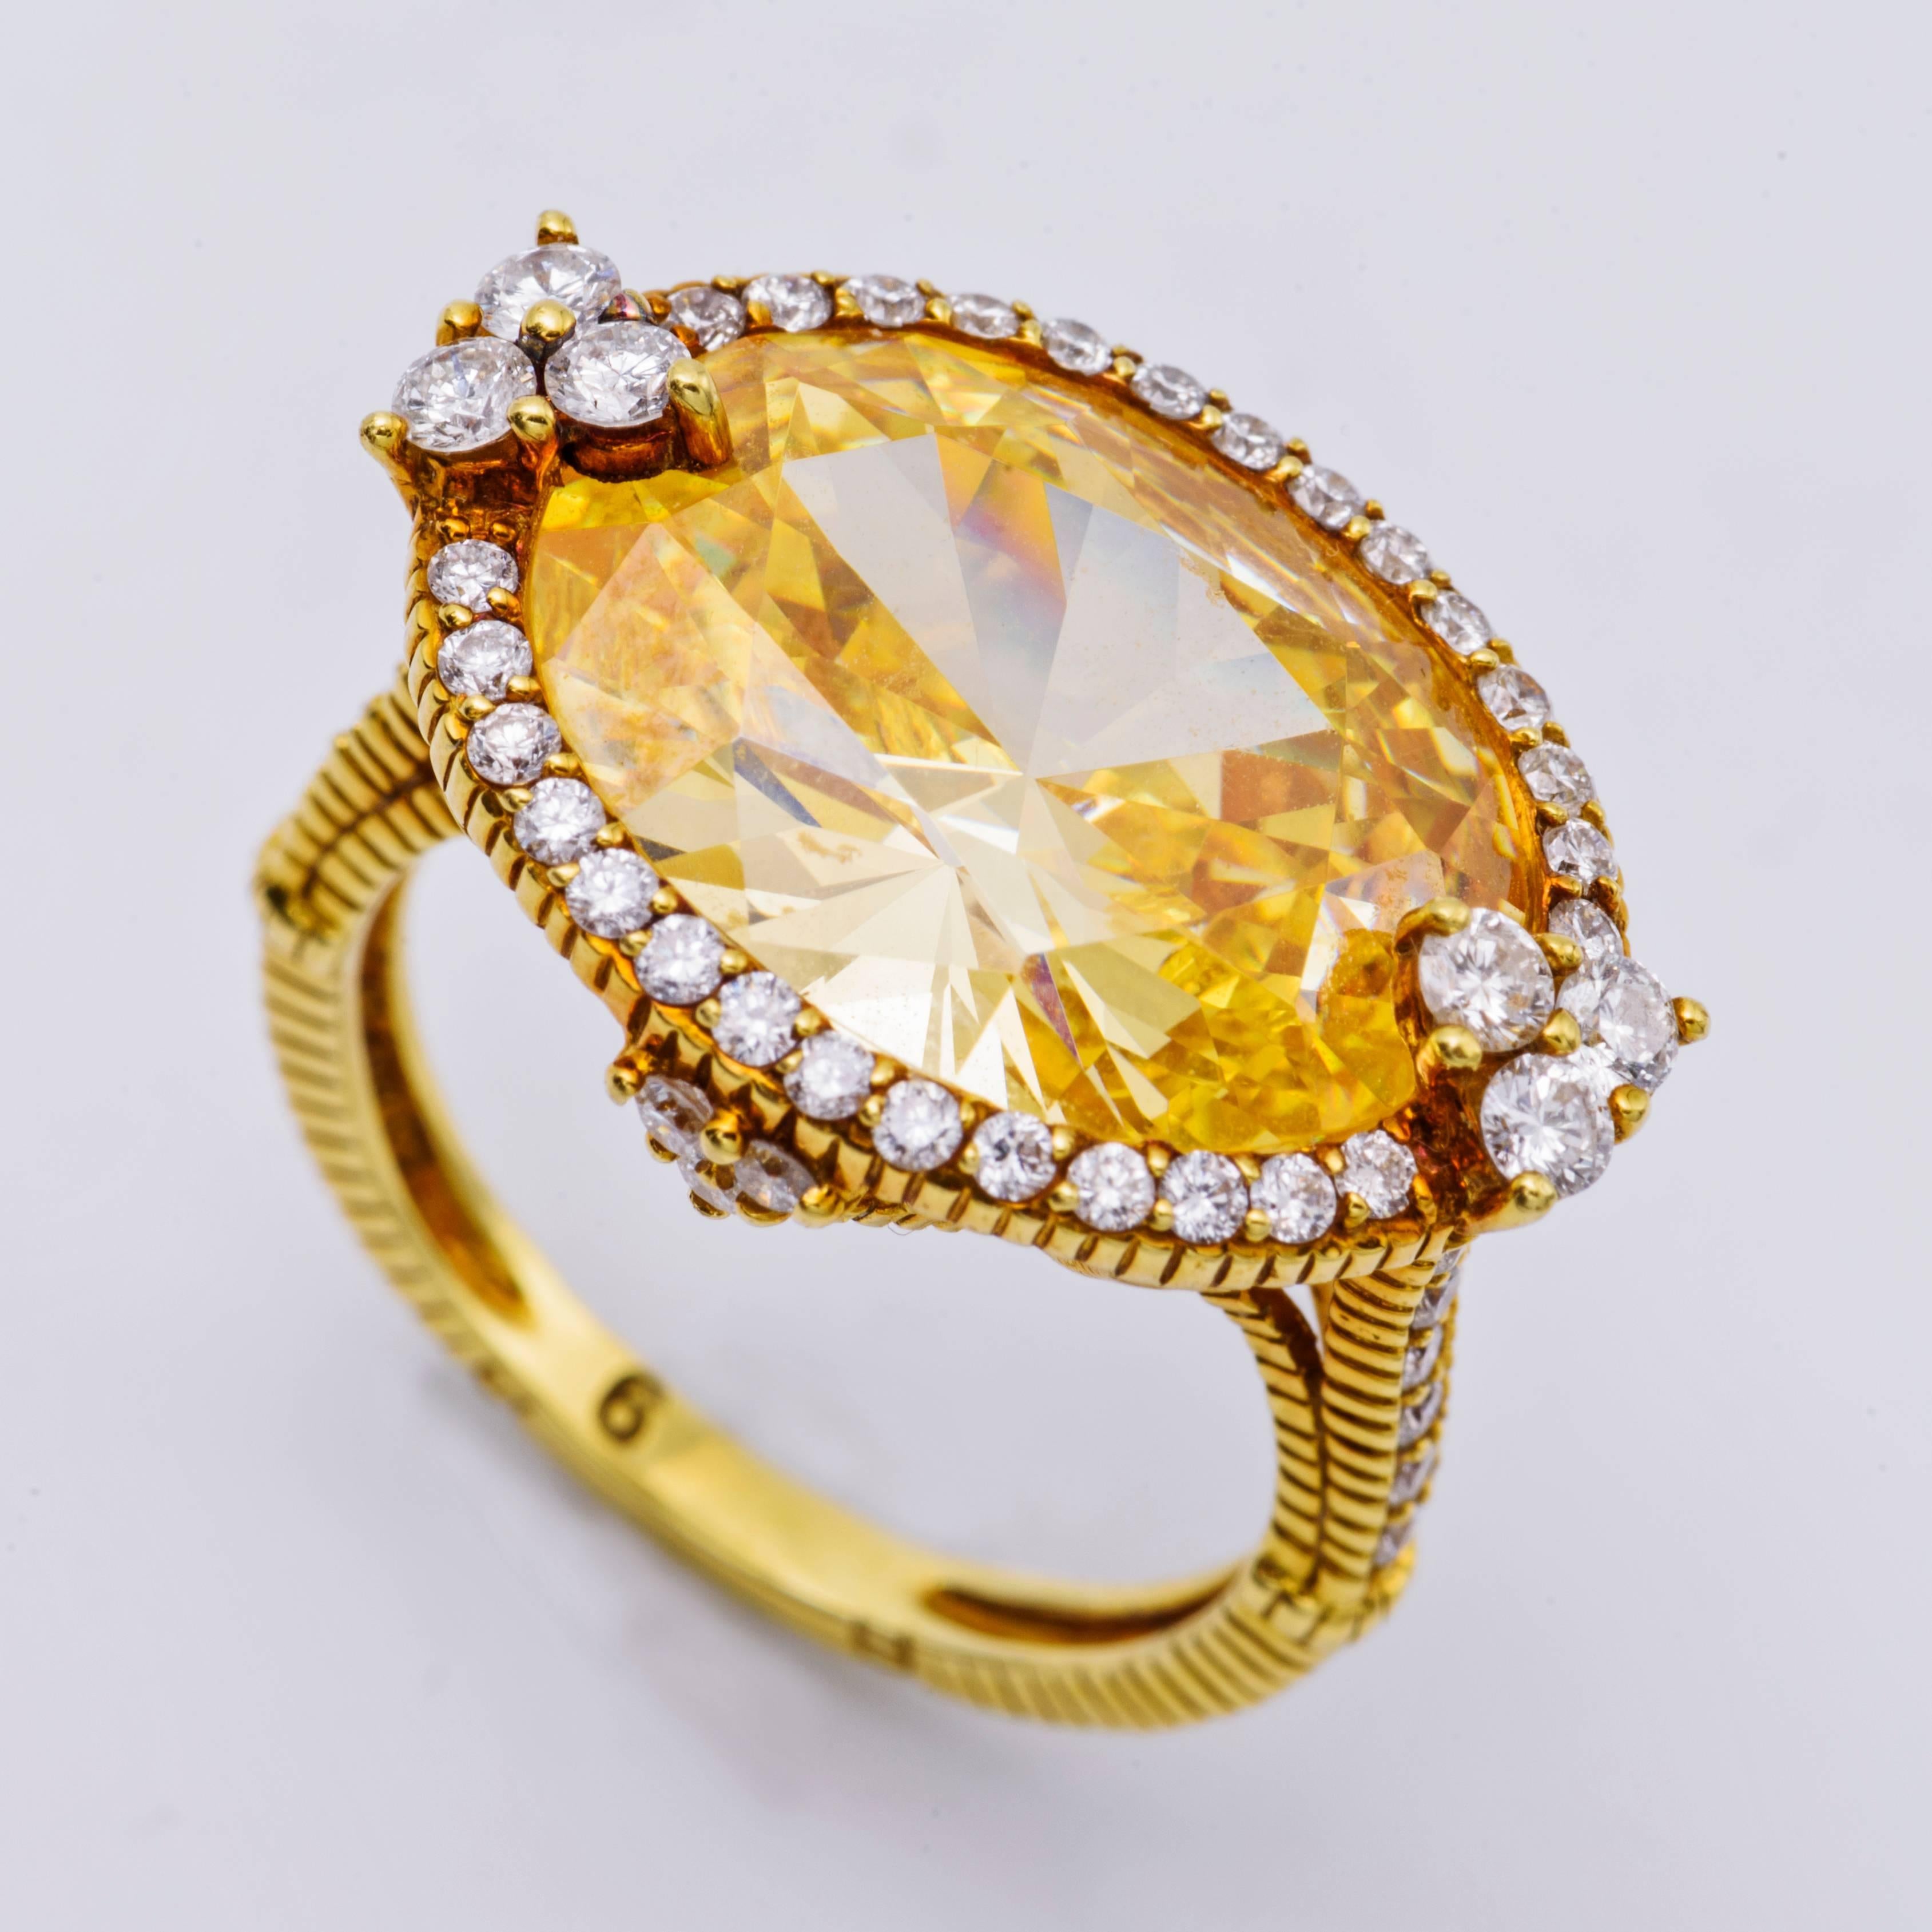 Judith Ripka Stunning Canary Color Topaz Ring crafted in 54 round White Diamonds.
Set in 18 Karat Yellow Gold.